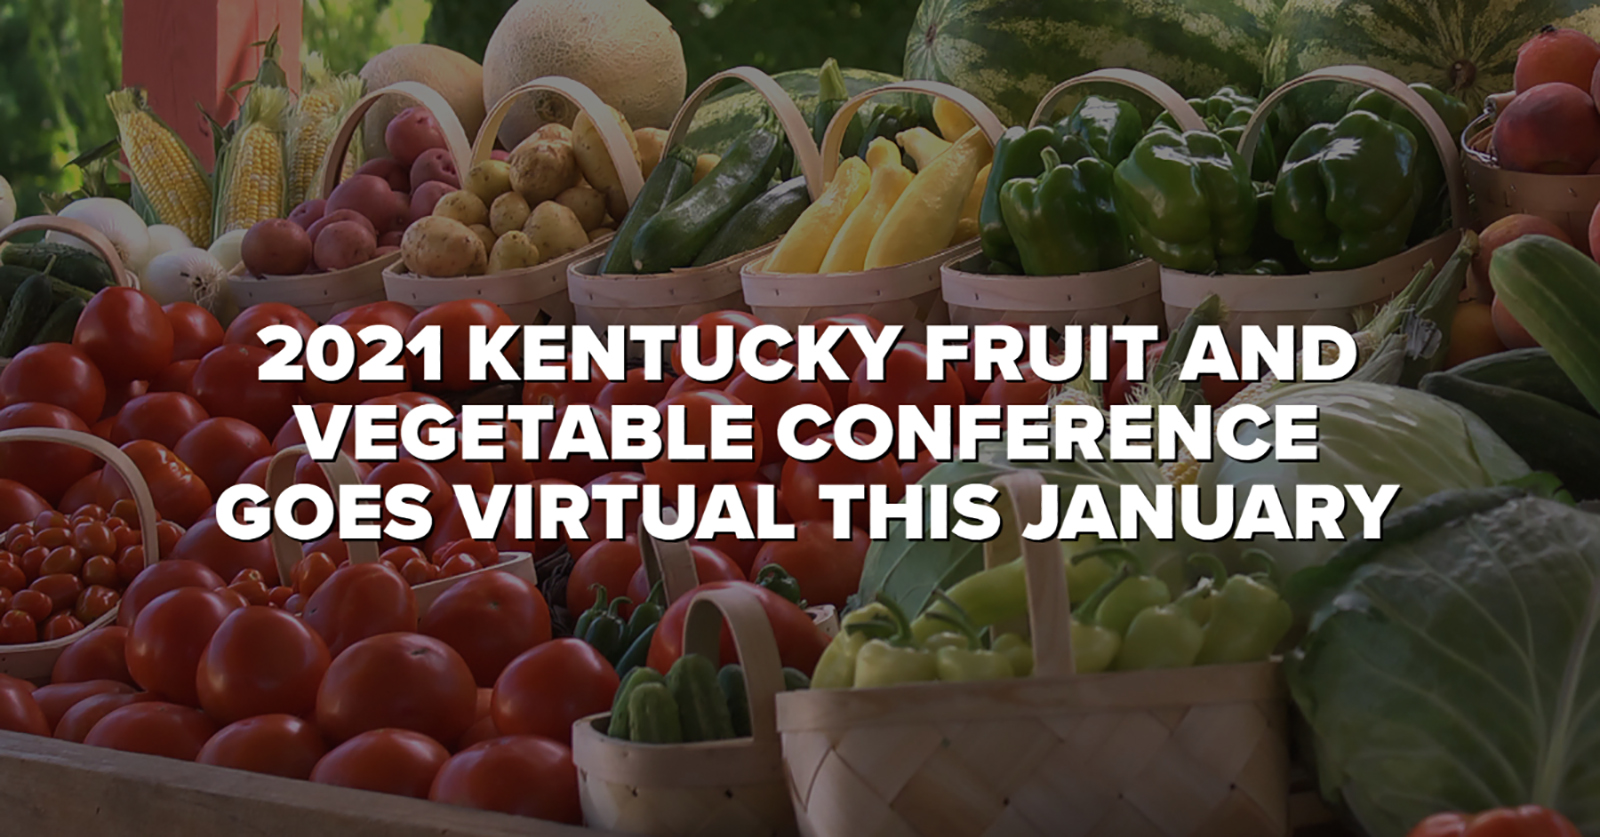 2021 Kentucky Fruit and Vegetable Conference